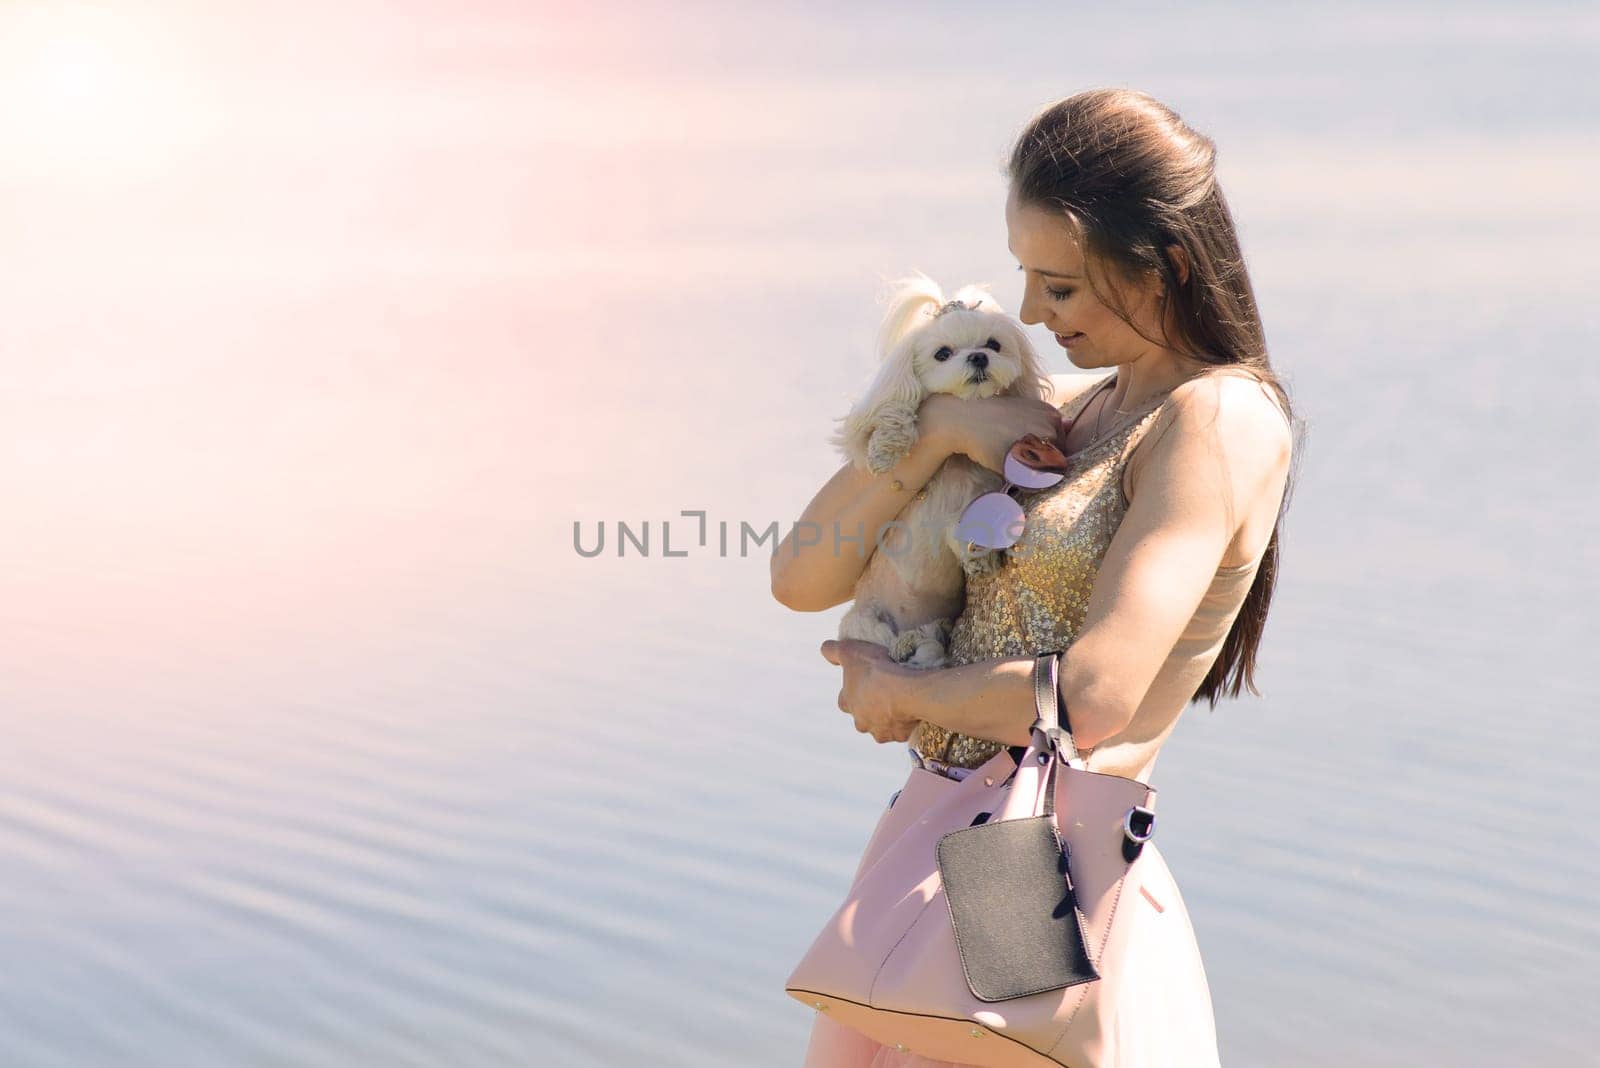 Young woman with her dog. Puppy white dog is running with it's owner. Concept about friendship and animal.